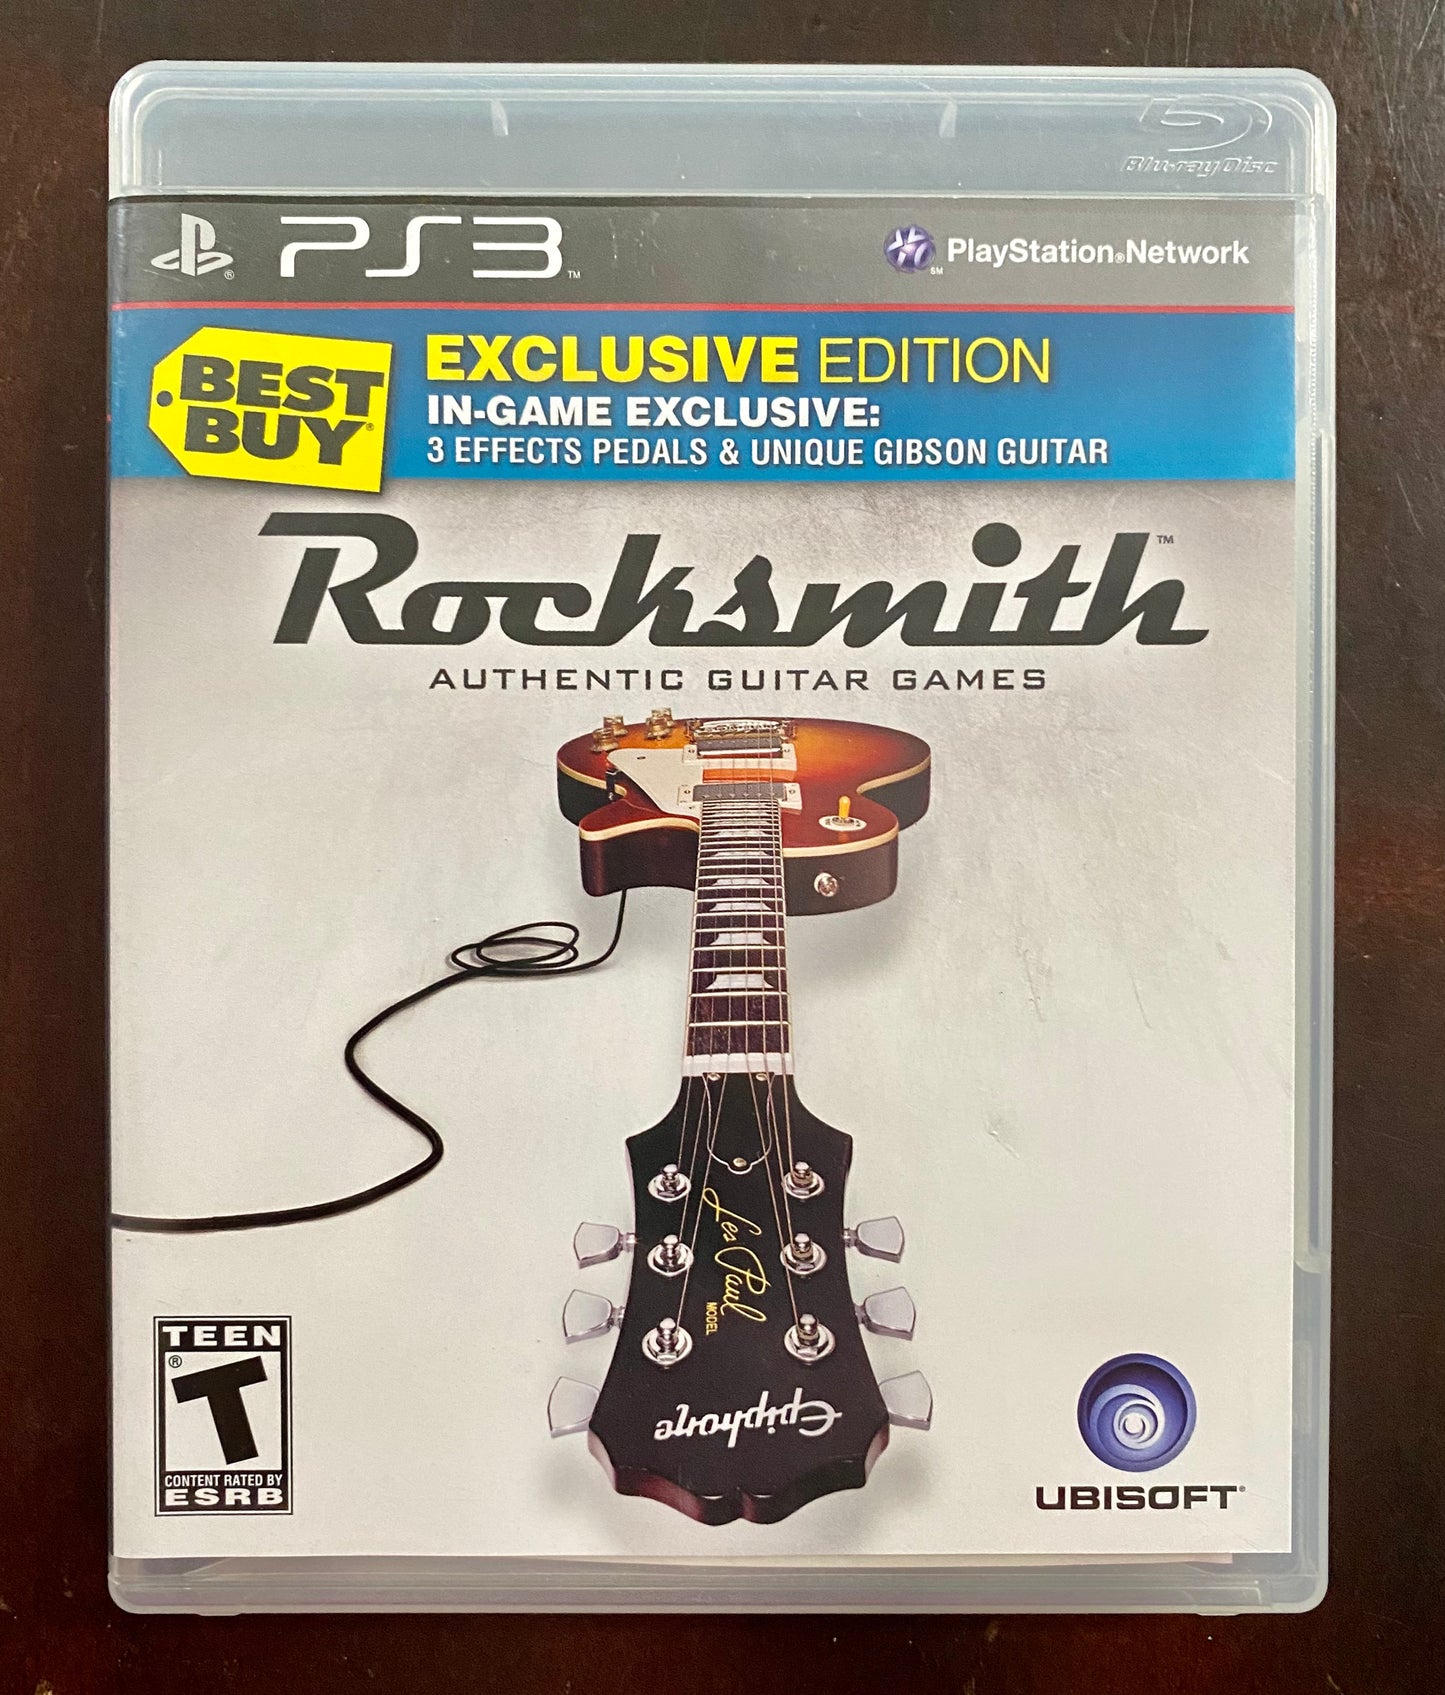 Rocksmith Authentic Guitar Games PlayStation 3 PS3 Video Game 37688-174